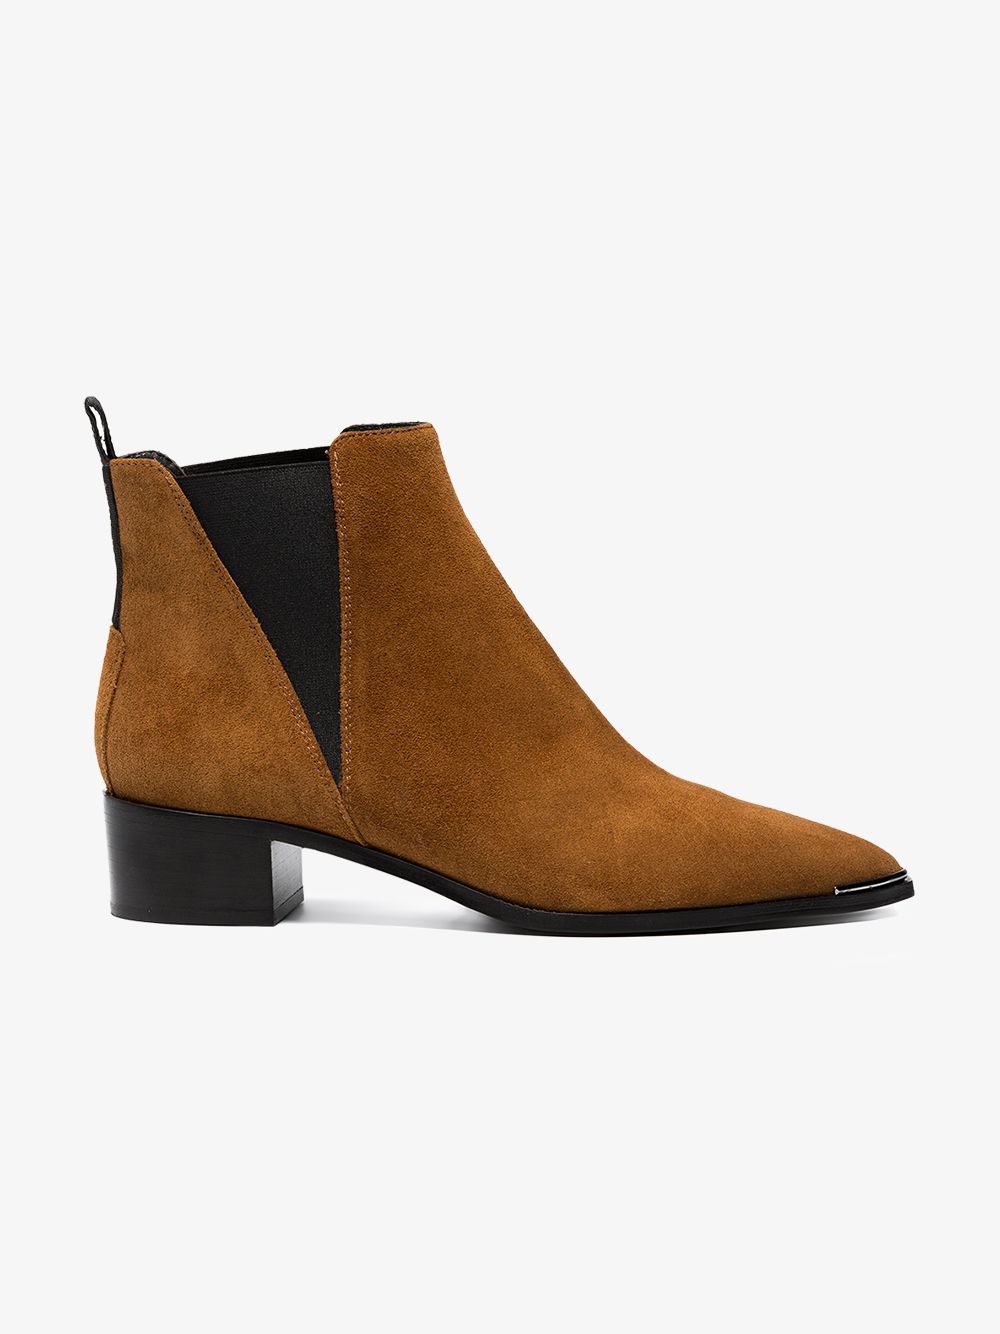 Acne Studios Brown Jensen 40 Suede ankle boots | Browns Fashion